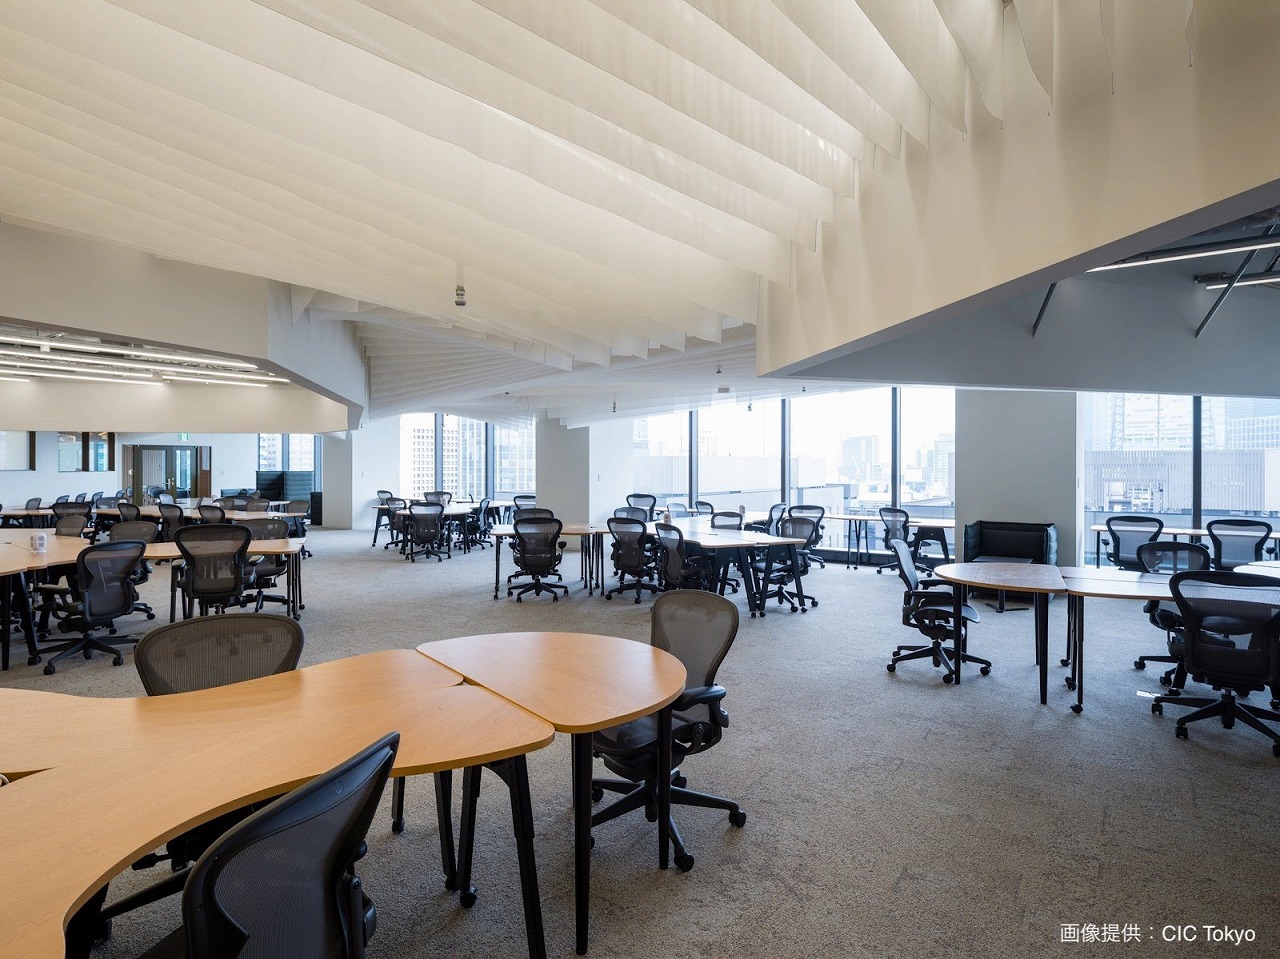 Shared area: Coworking space. Fully equipped and comfortable office environment.